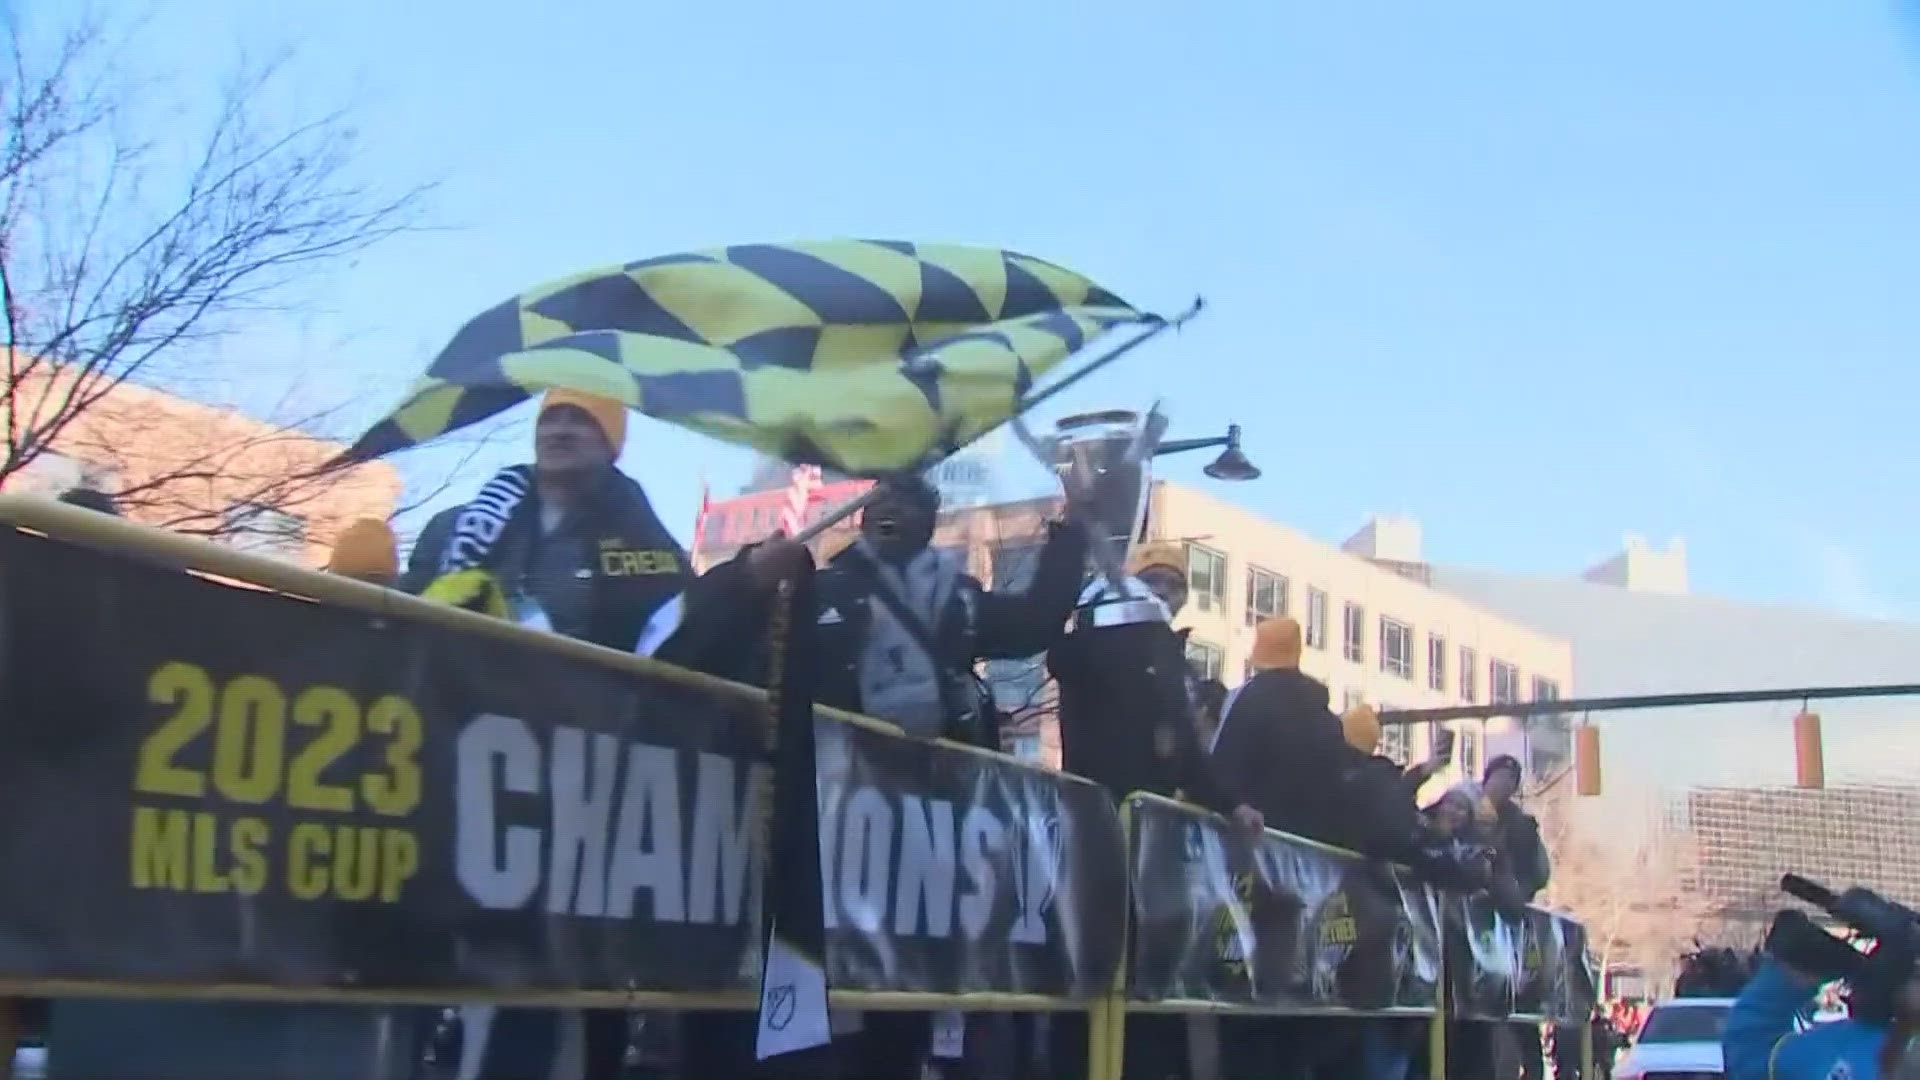 The Columbus Crew and fans have gathered in the Arena District to celebrate the Columbus Crew's third MLS Cup championship!